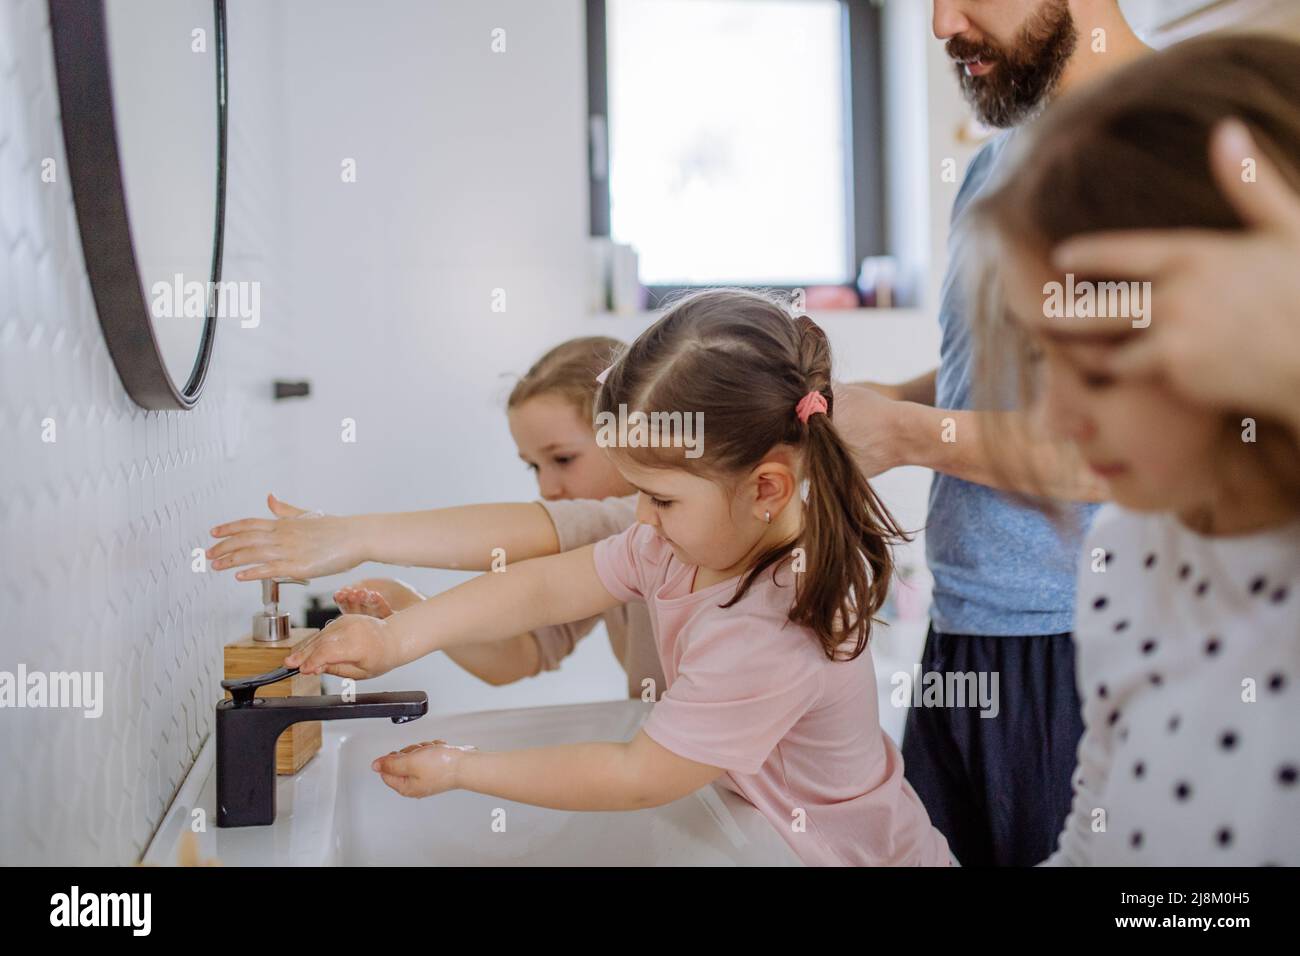 Father with three little children in bathroom, morning routine concept. Stock Photo